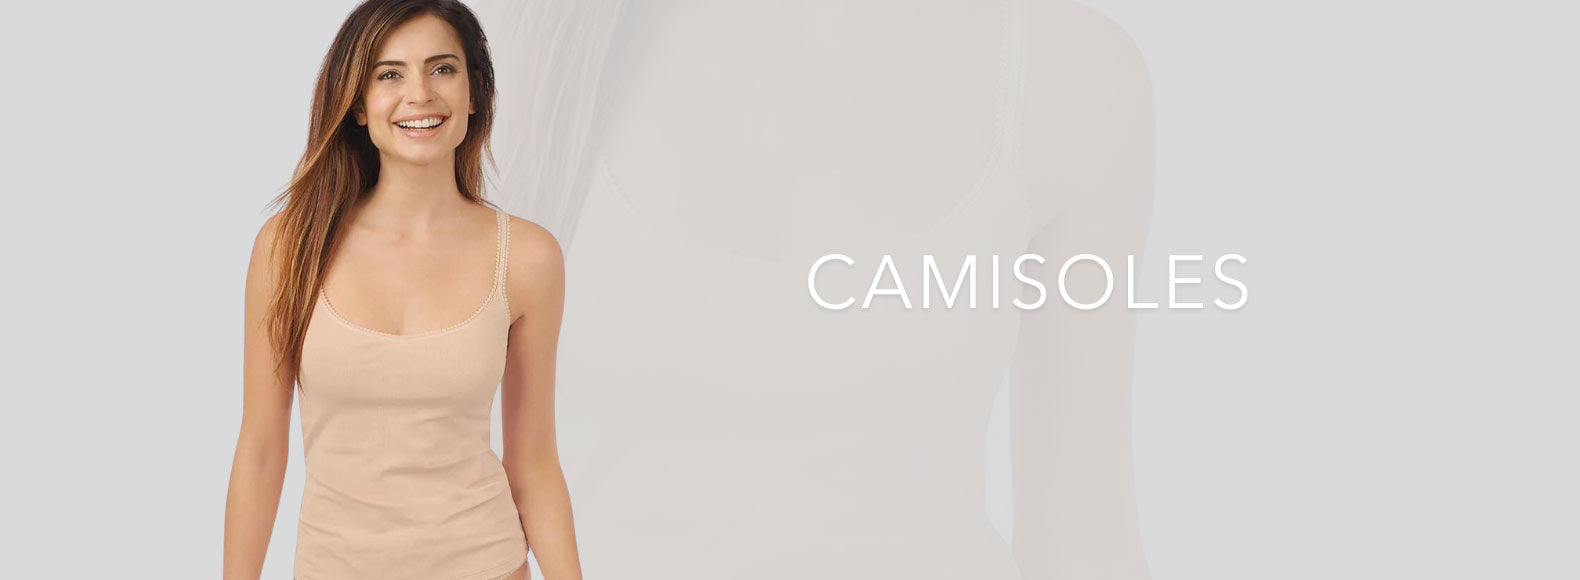 women camisoles Collections